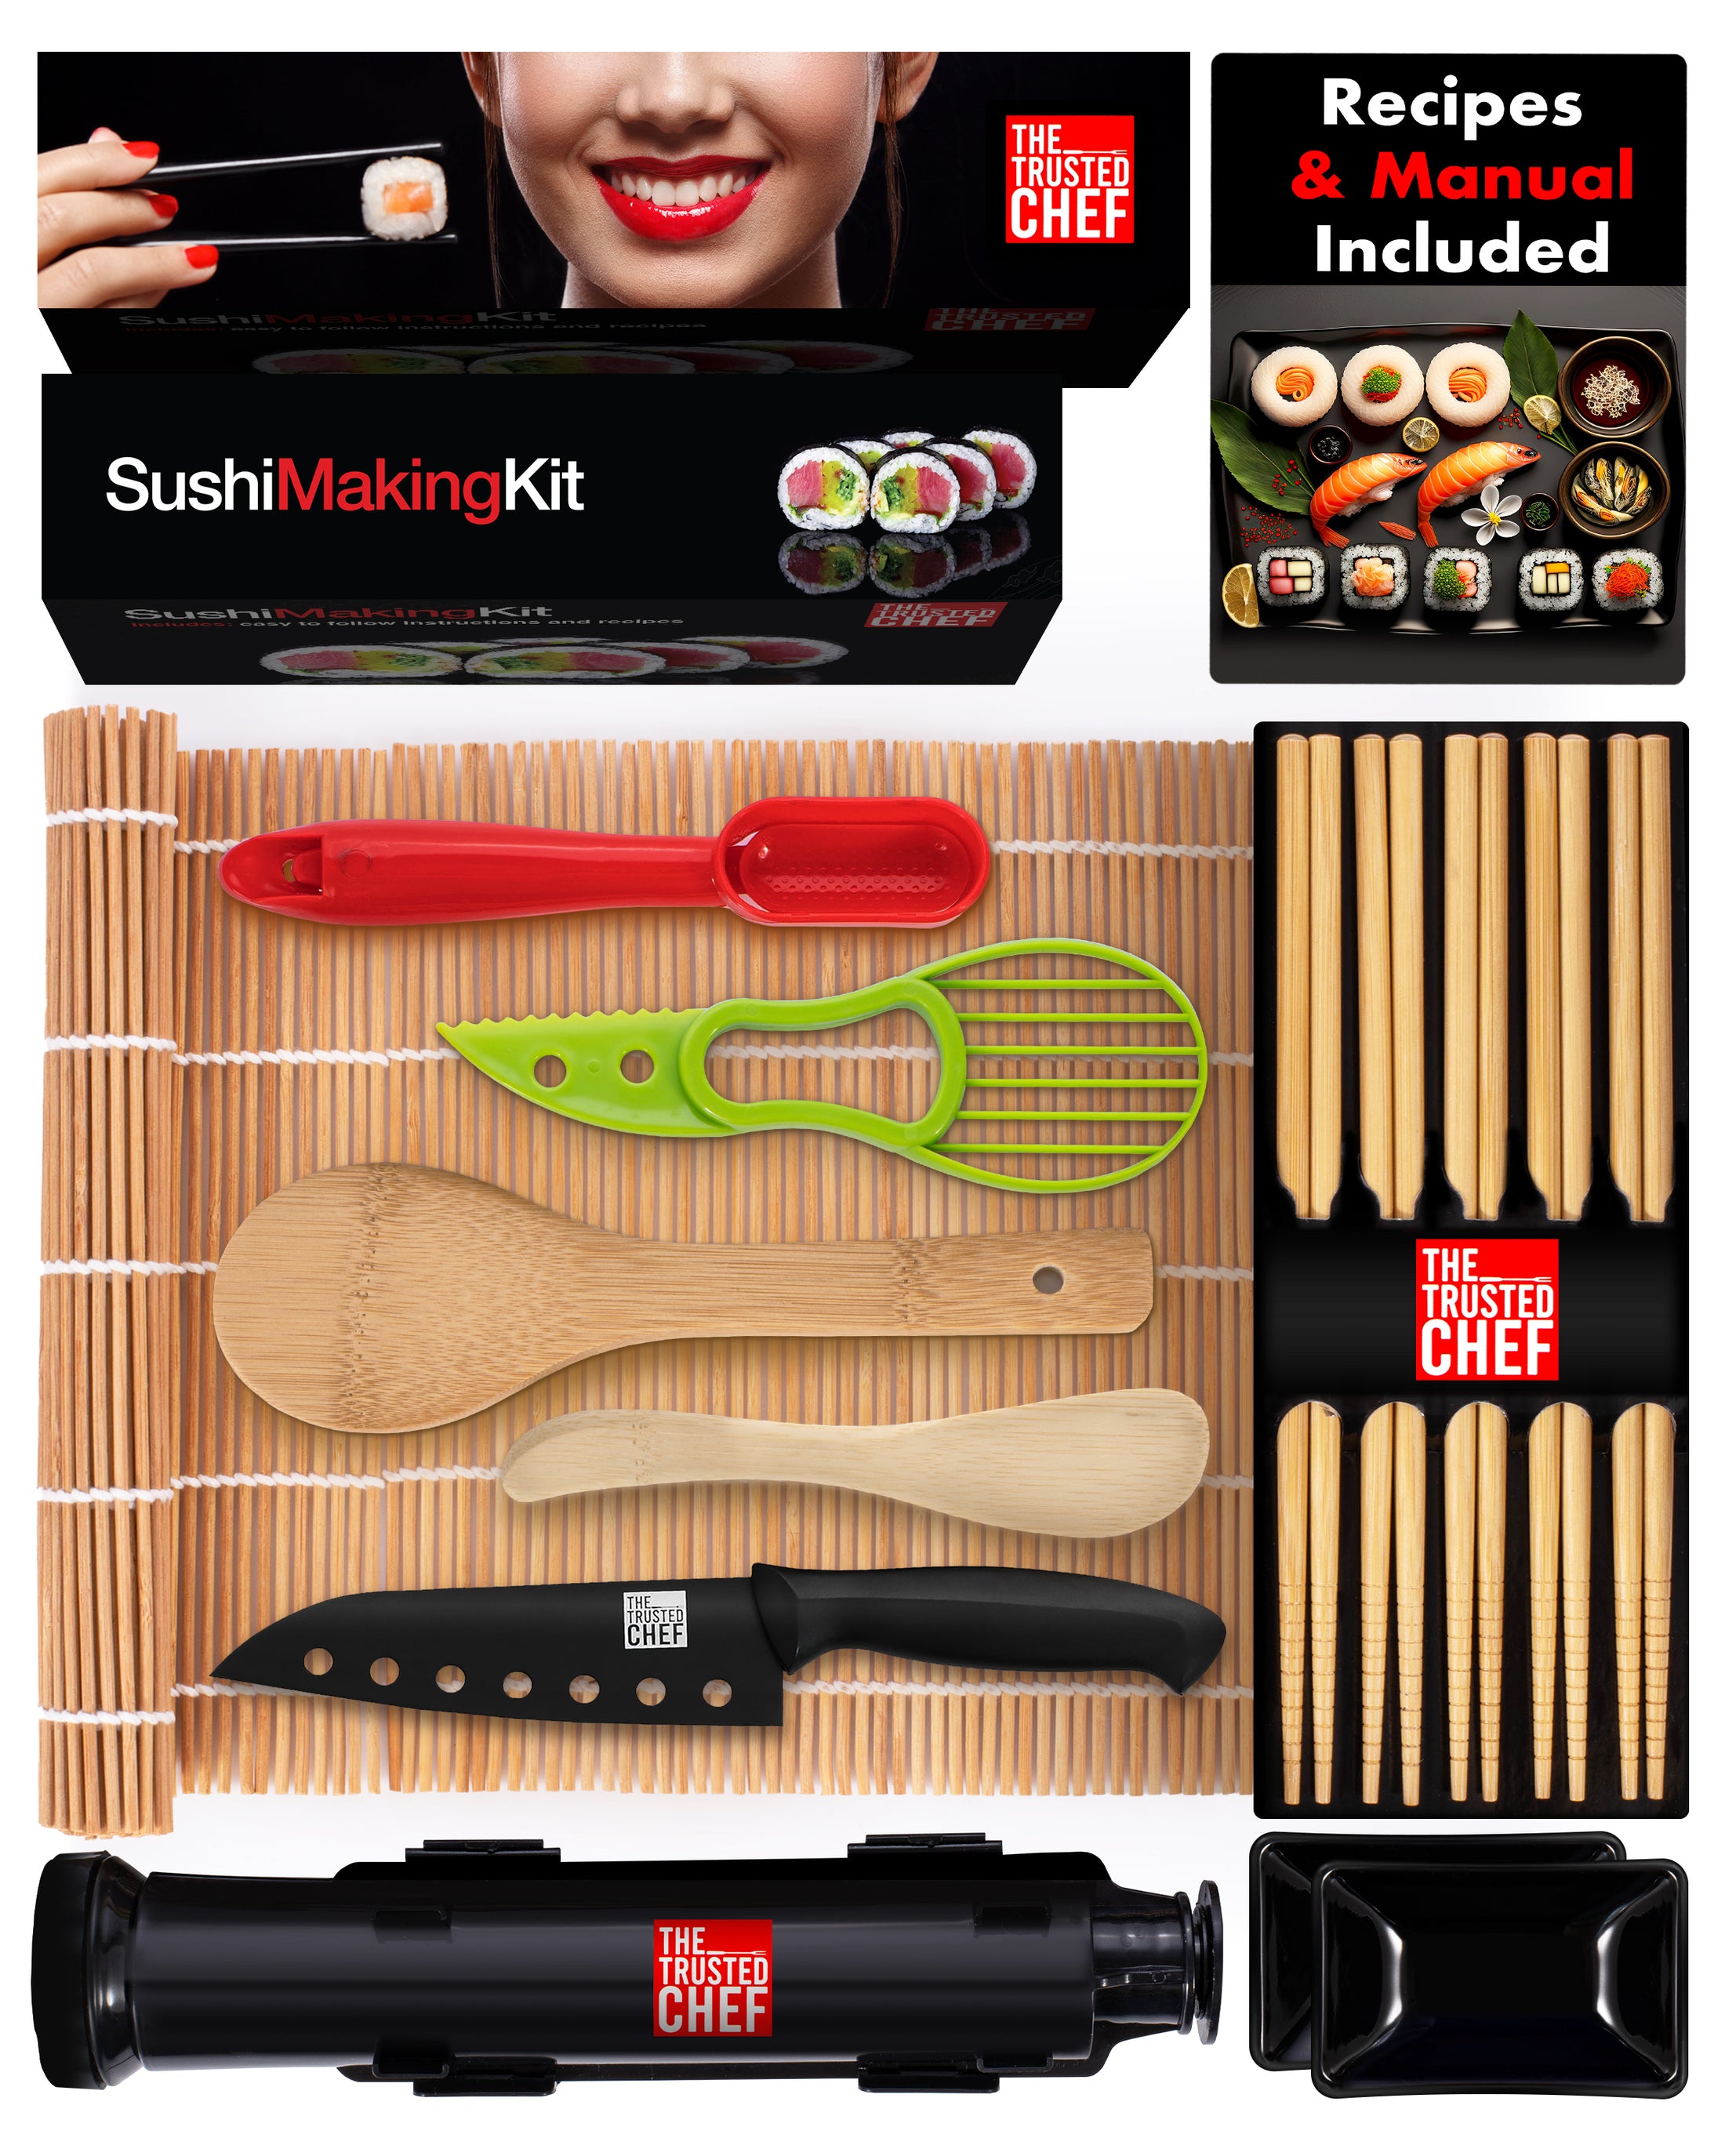 The Trusted Chef Sushi Making Kit